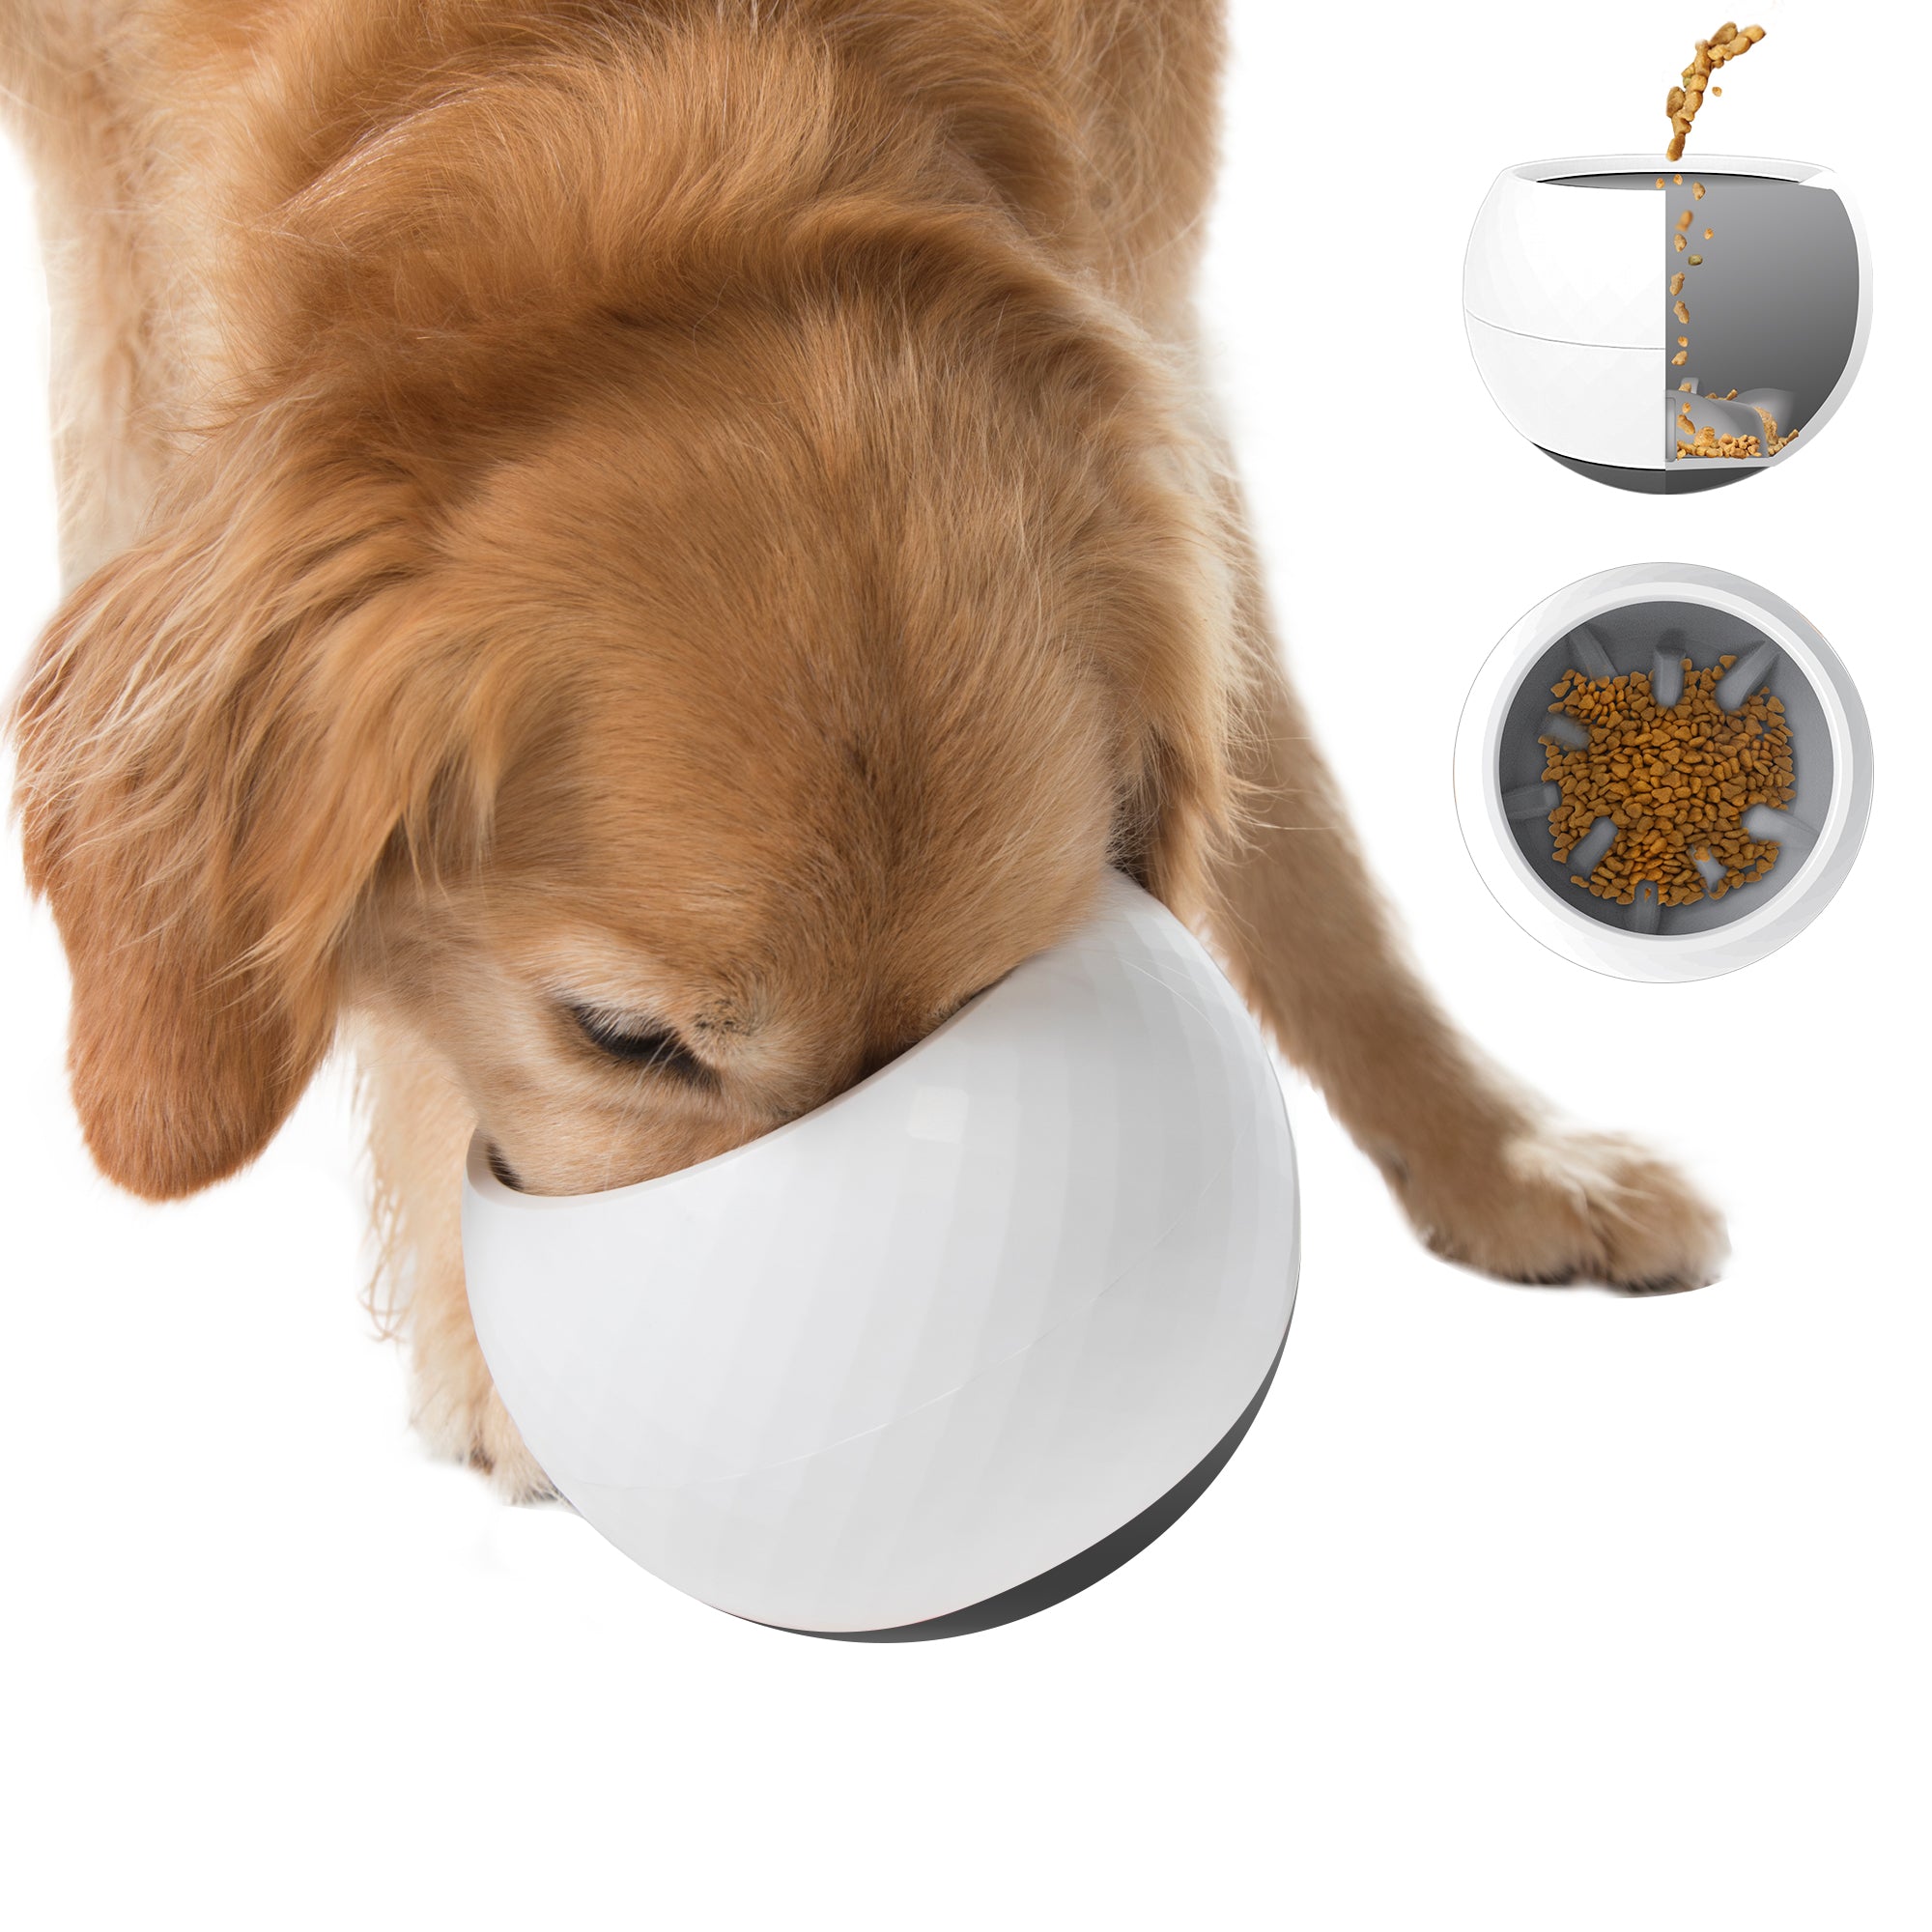 Dog Bowls-Slow Feeder Dog Bowls ,Dog Food and Water Bowls with Slow Feeder Dog Bowls,Collapsible Spill Proof Dog Bowl for Small Medium Dogs Cats Pets